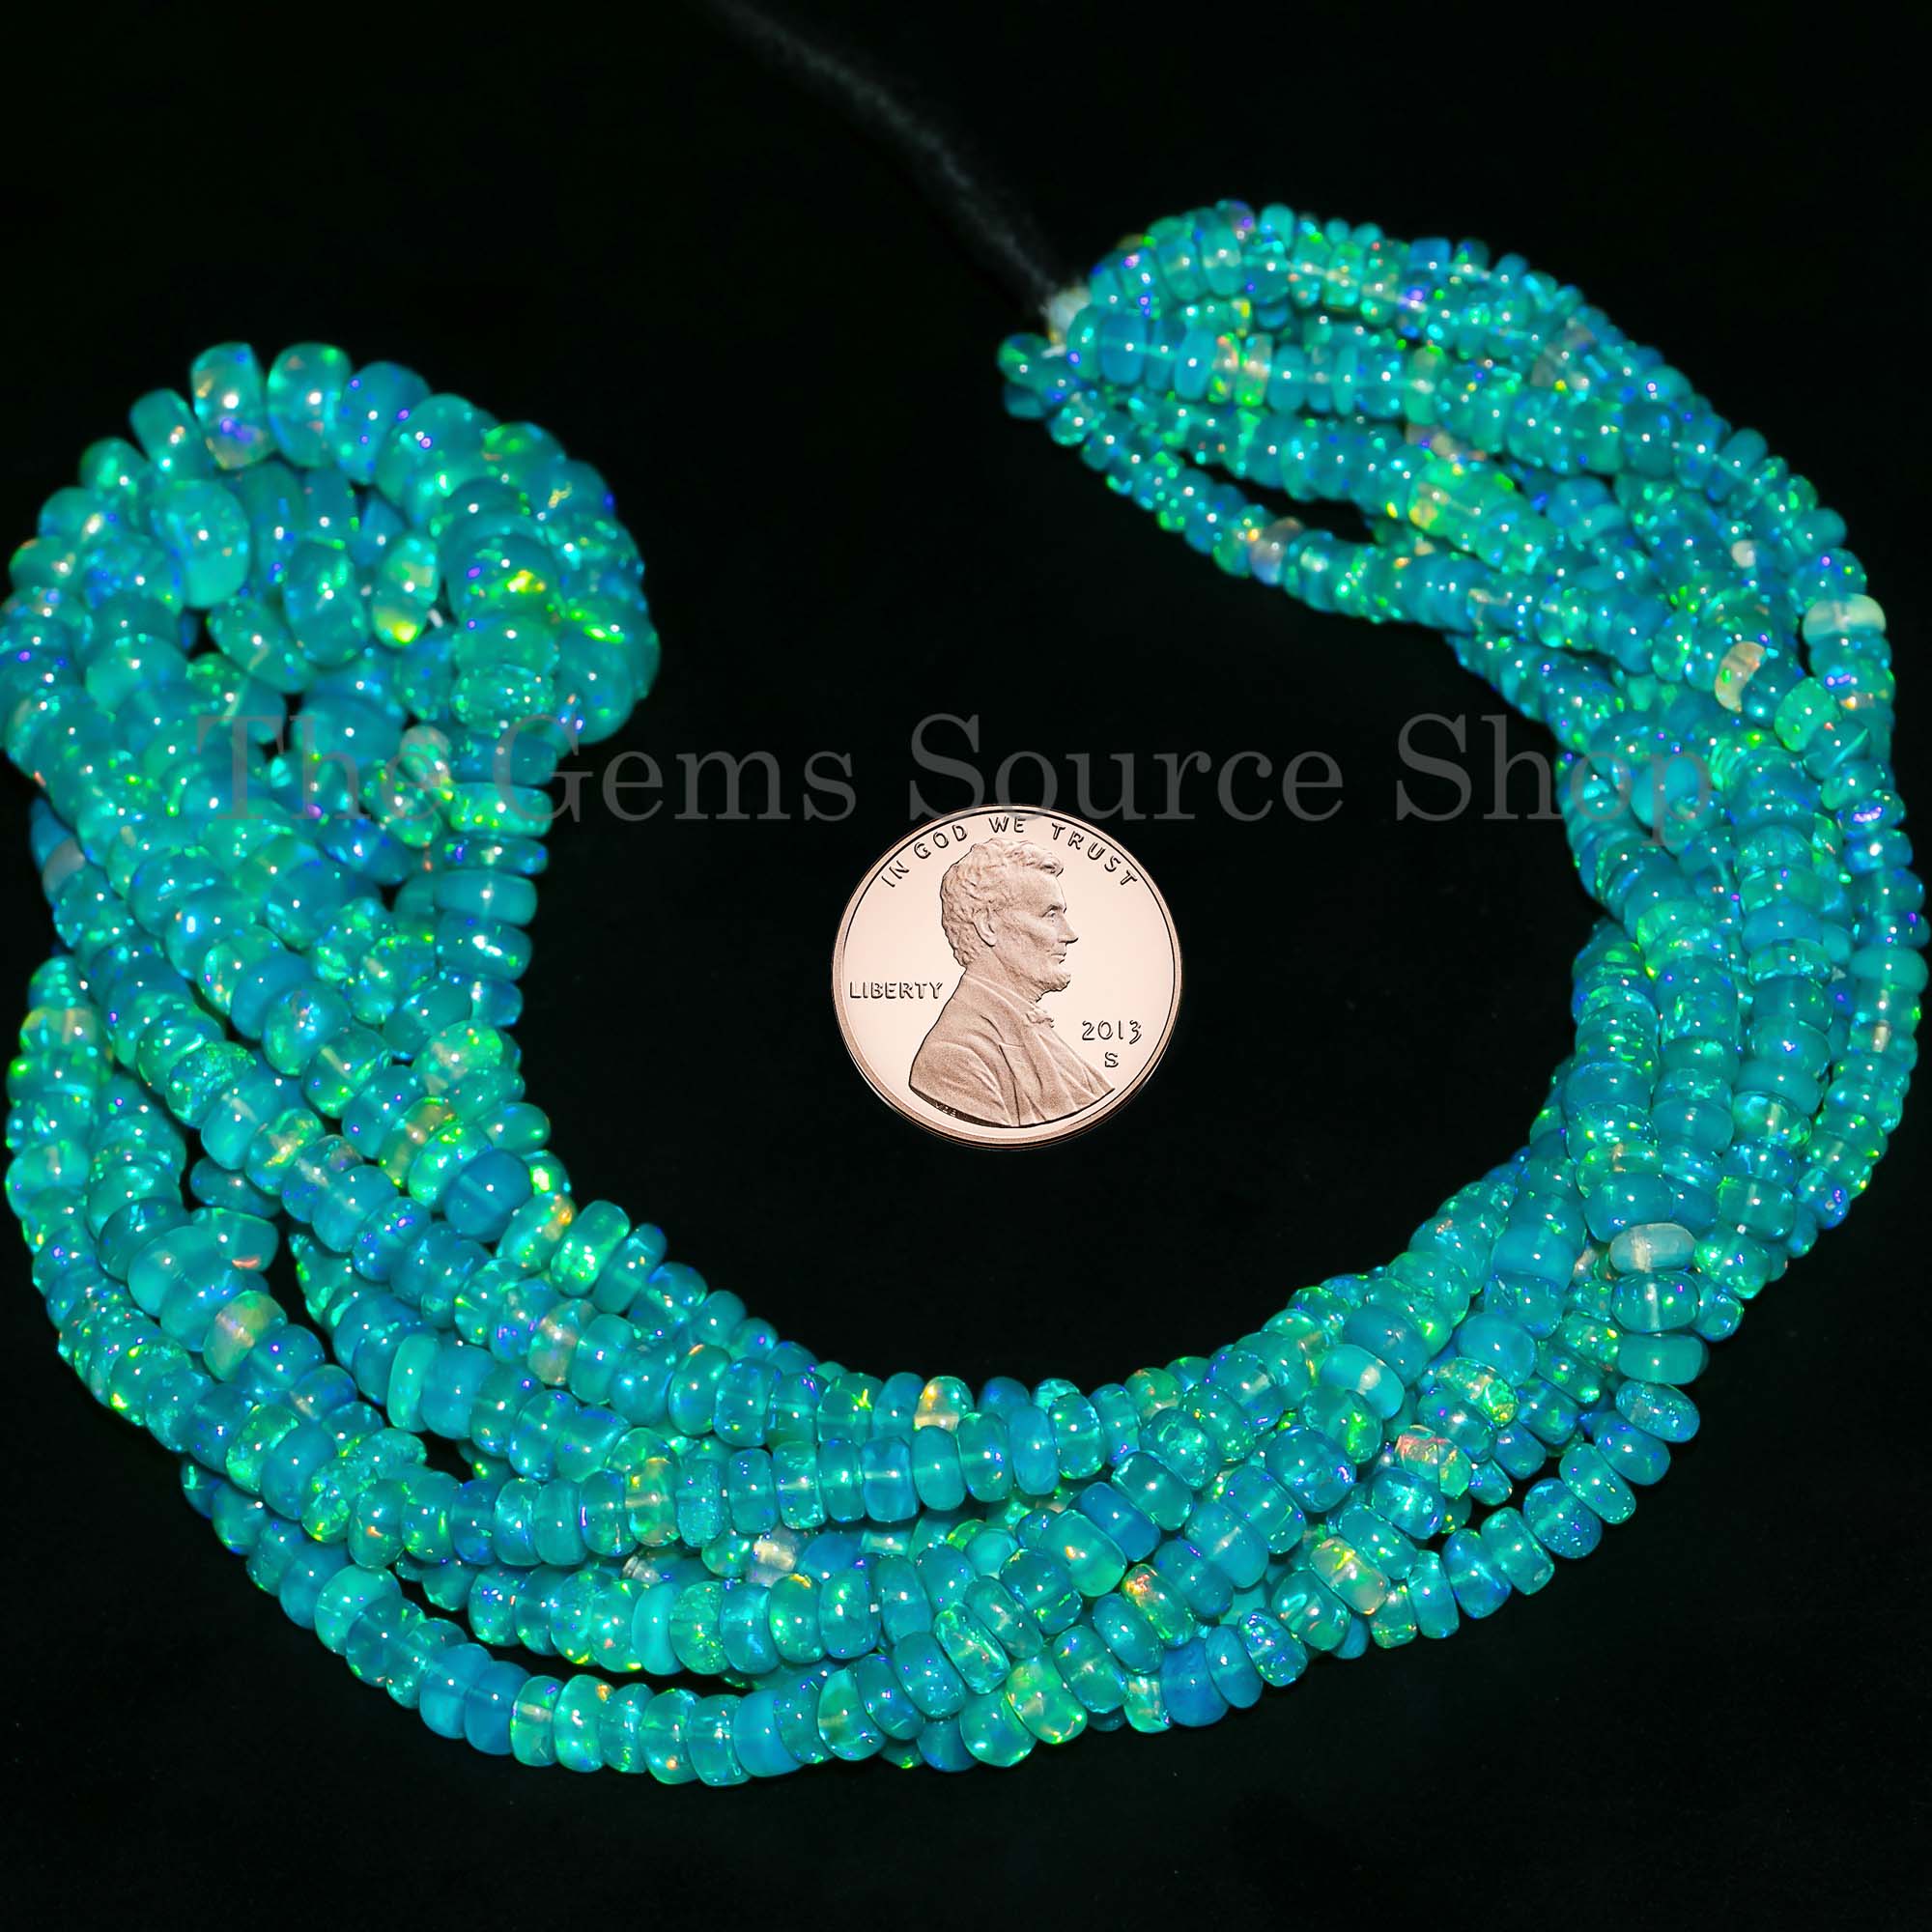 Smooth Plain Blue Opal Rondelle Beads, 3-5mm Blue Opal Rondelle, Opal Plain Beads, Blue Opal Beads